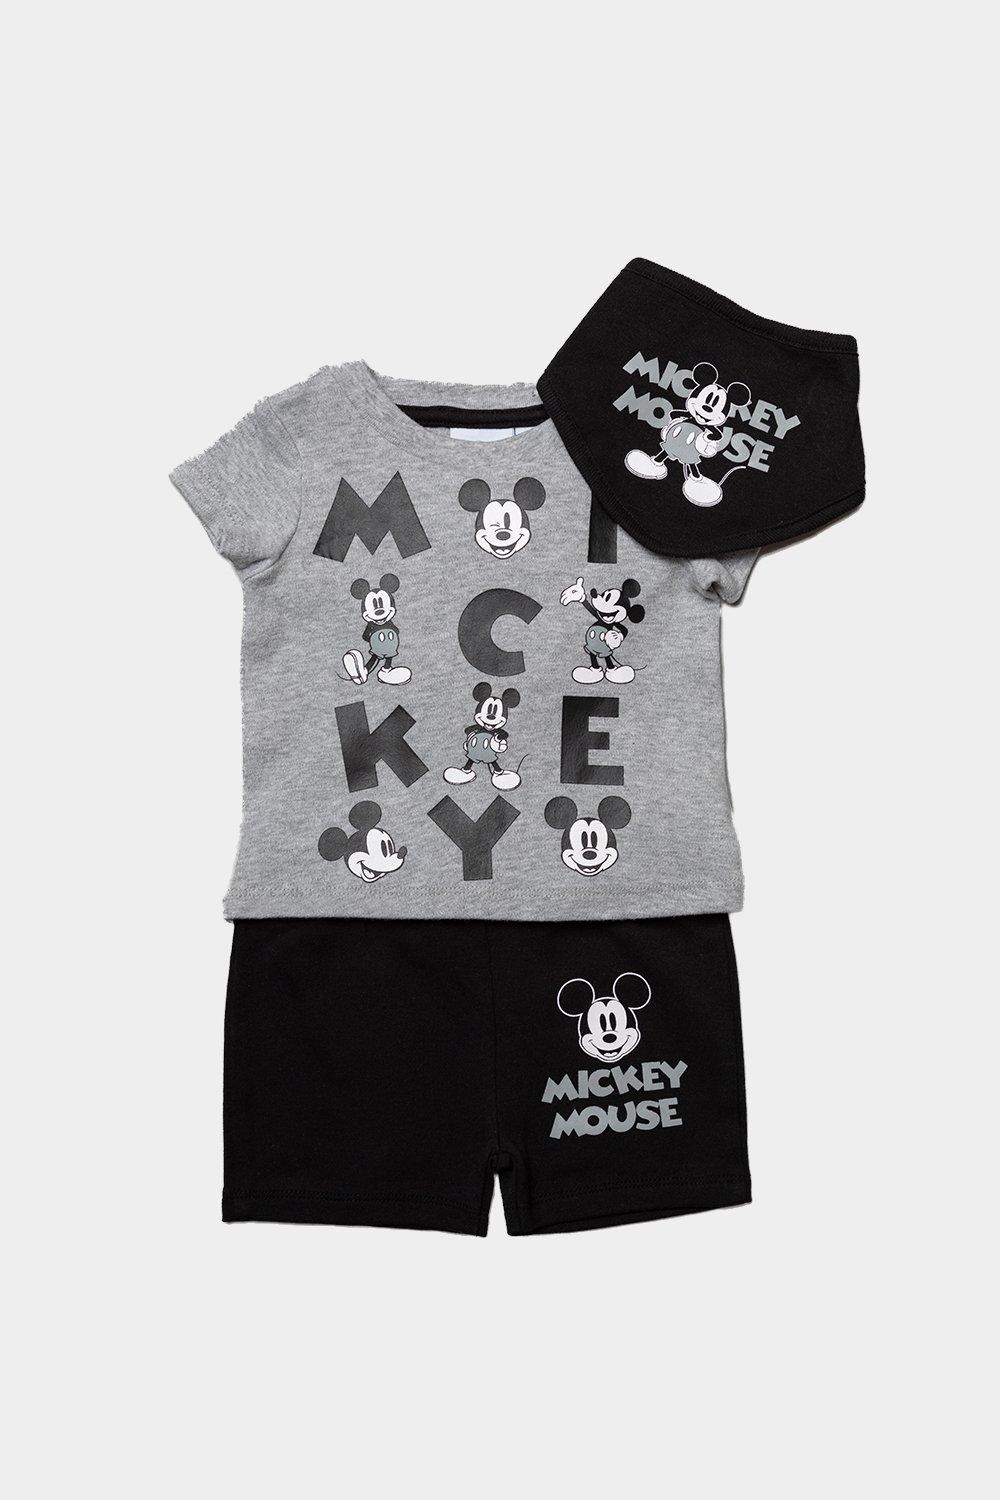 Mickey Mouse Classic 3-Piece Outfit